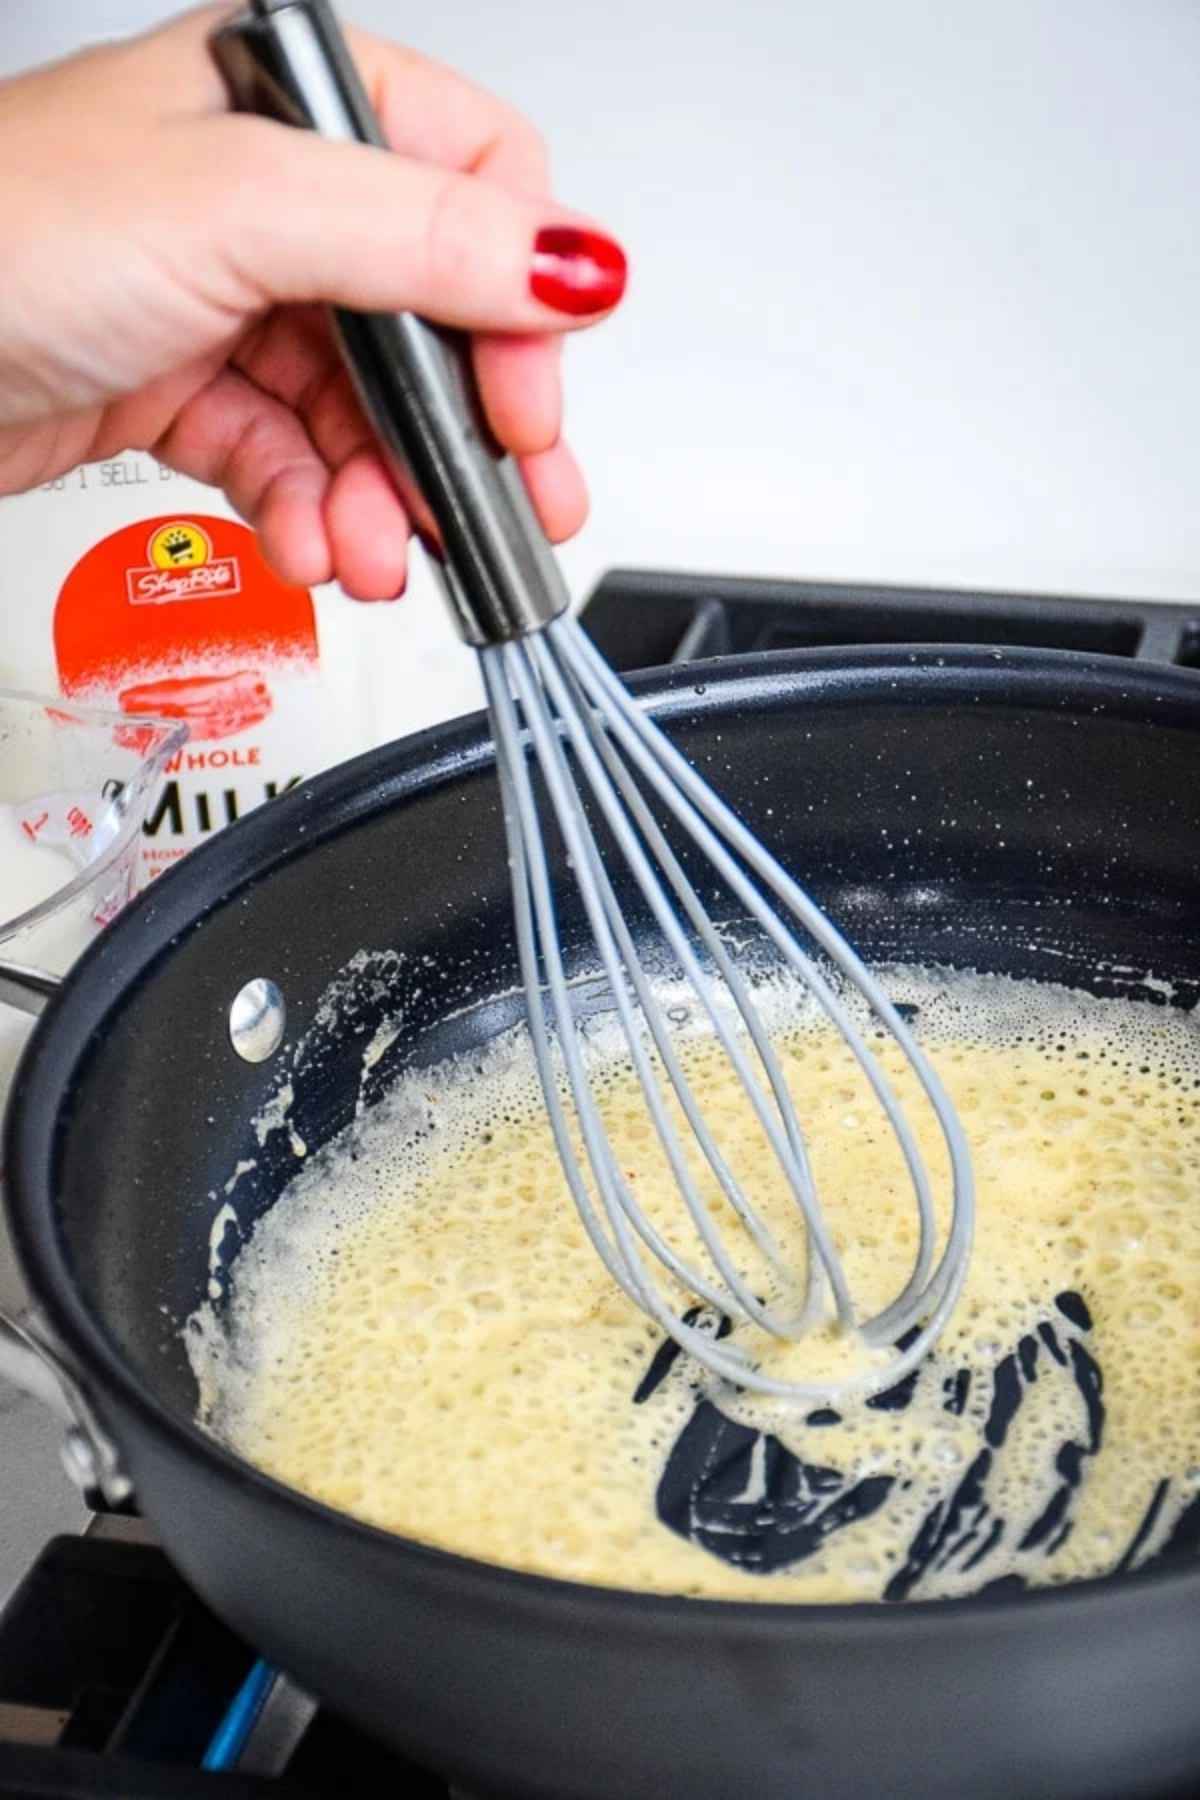 Mixing the roux in the skillet.